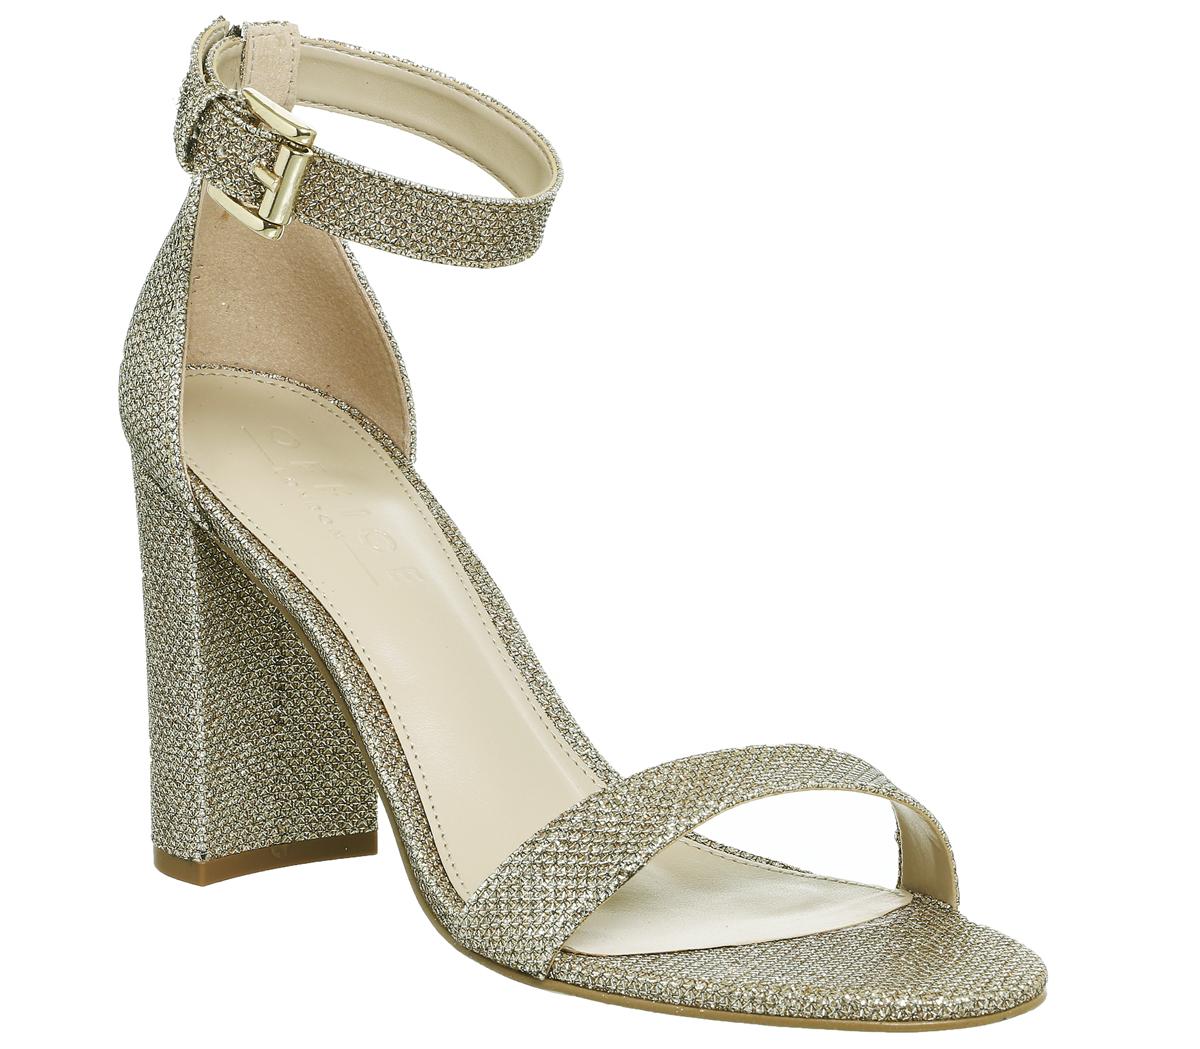 champagne block heel shoes